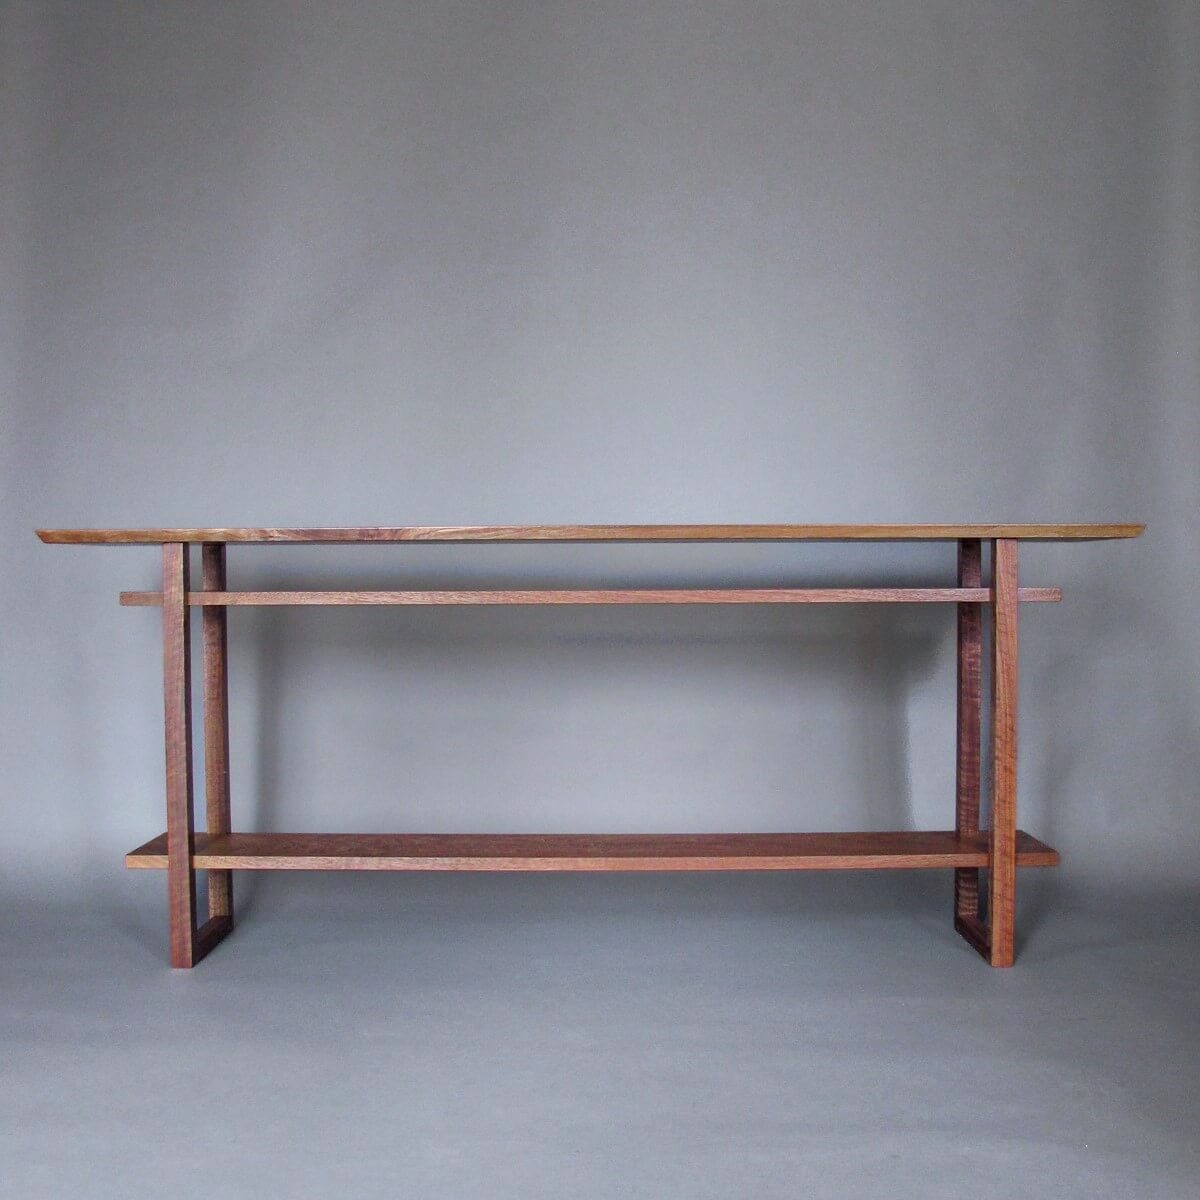 long console table with shelves for hallway decor by Mokuzai Furniture